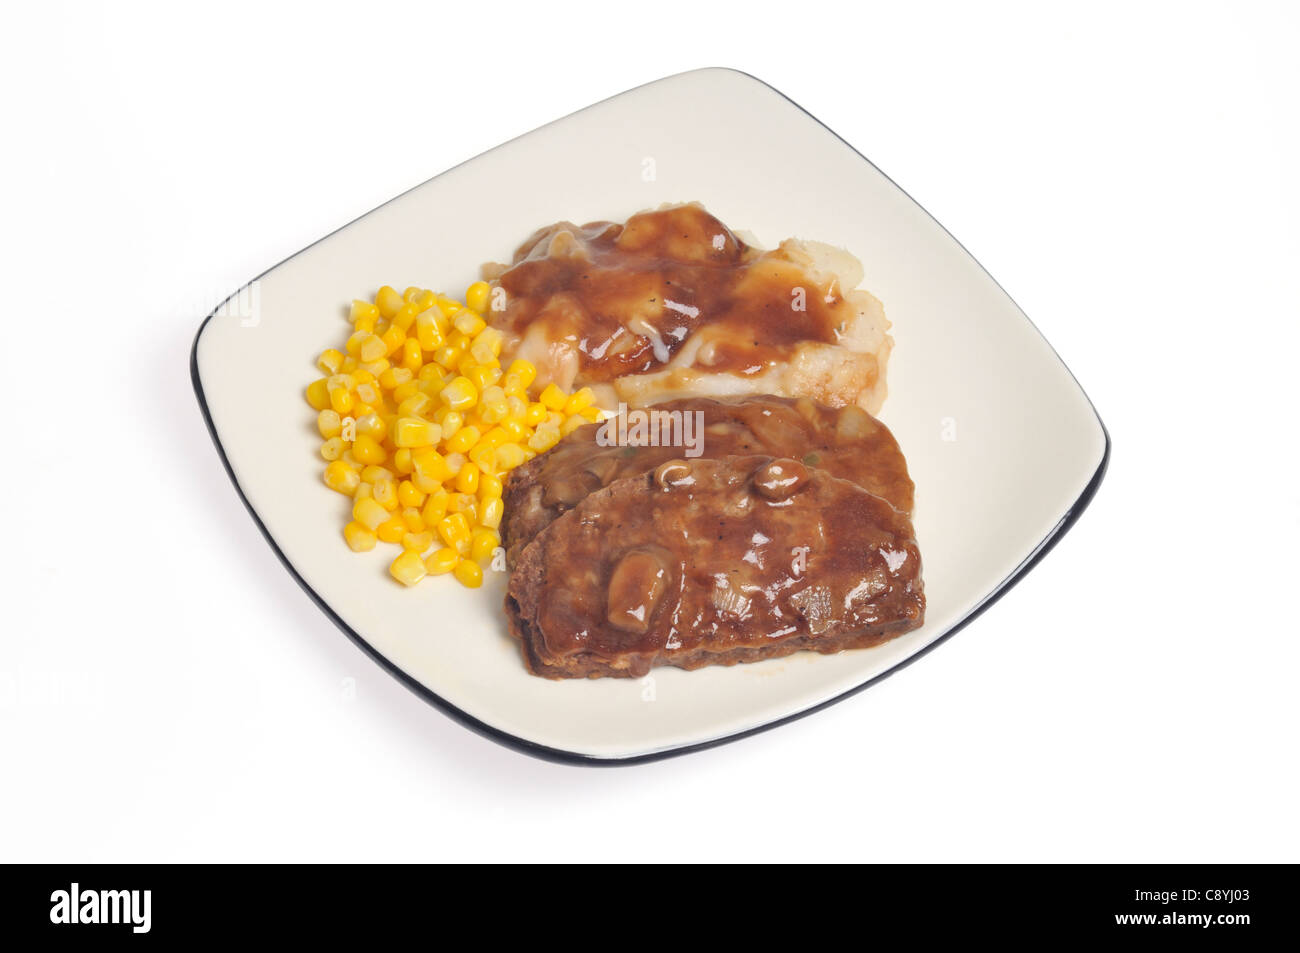 Slice of cooked meatloaf meal with mushroom gravy, mashed potatoes and sweet corn on white plate on white background, cutout. Stock Photo